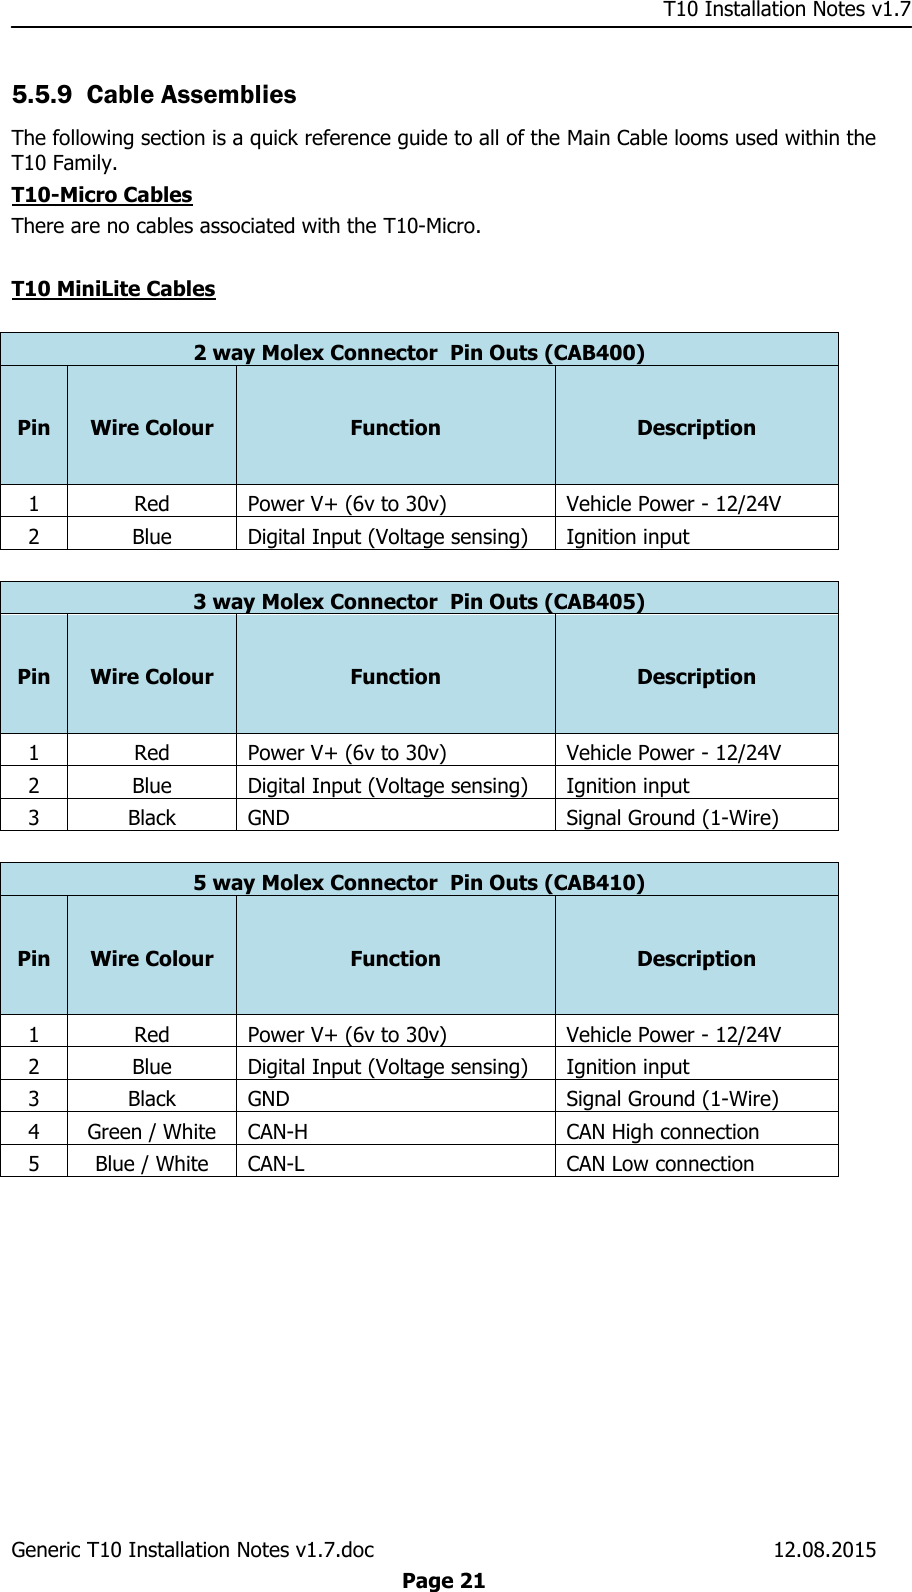     T10 Installation Notes v1.7 Generic T10 Installation Notes v1.7.doc    12.08.2015  Page 21 5.5.9 Cable Assemblies The following section is a quick reference guide to all of the Main Cable looms used within the T10 Family. T10-Micro Cables There are no cables associated with the T10-Micro.  T10 MiniLite Cables  2 way Molex Connector  Pin Outs (CAB400) Pin Wire Colour Function Description 1 Red Power V+ (6v to 30v) Vehicle Power - 12/24V 2 Blue Digital Input (Voltage sensing) Ignition input  3 way Molex Connector  Pin Outs (CAB405) Pin Wire Colour Function Description 1 Red Power V+ (6v to 30v) Vehicle Power - 12/24V 2 Blue Digital Input (Voltage sensing) Ignition input 3 Black GND Signal Ground (1-Wire)  5 way Molex Connector  Pin Outs (CAB410) Pin Wire Colour Function Description 1 Red Power V+ (6v to 30v) Vehicle Power - 12/24V 2 Blue Digital Input (Voltage sensing) Ignition input 3 Black GND Signal Ground (1-Wire) 4 Green / White CAN-H CAN High connection 5 Blue / White CAN-L CAN Low connection  